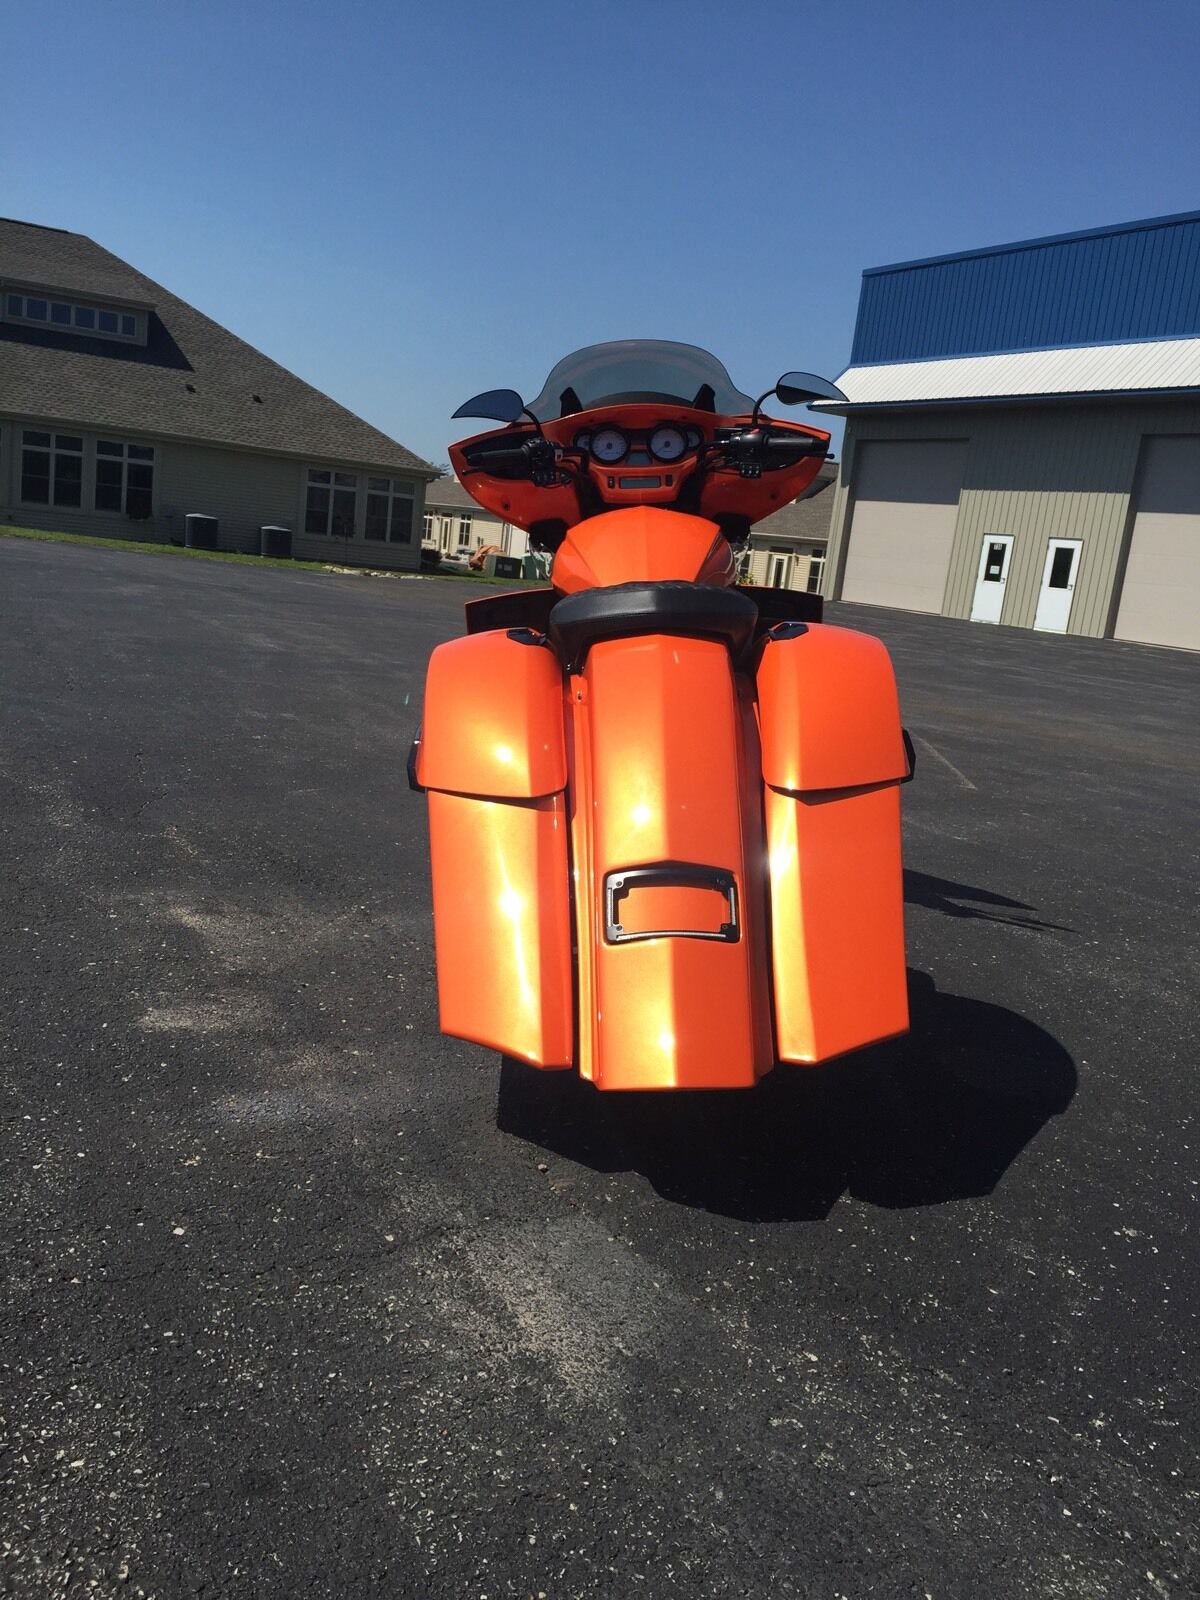 Victory Cross Country Bagger Motorcycle Down And Out Stretched Saddlebags And fender